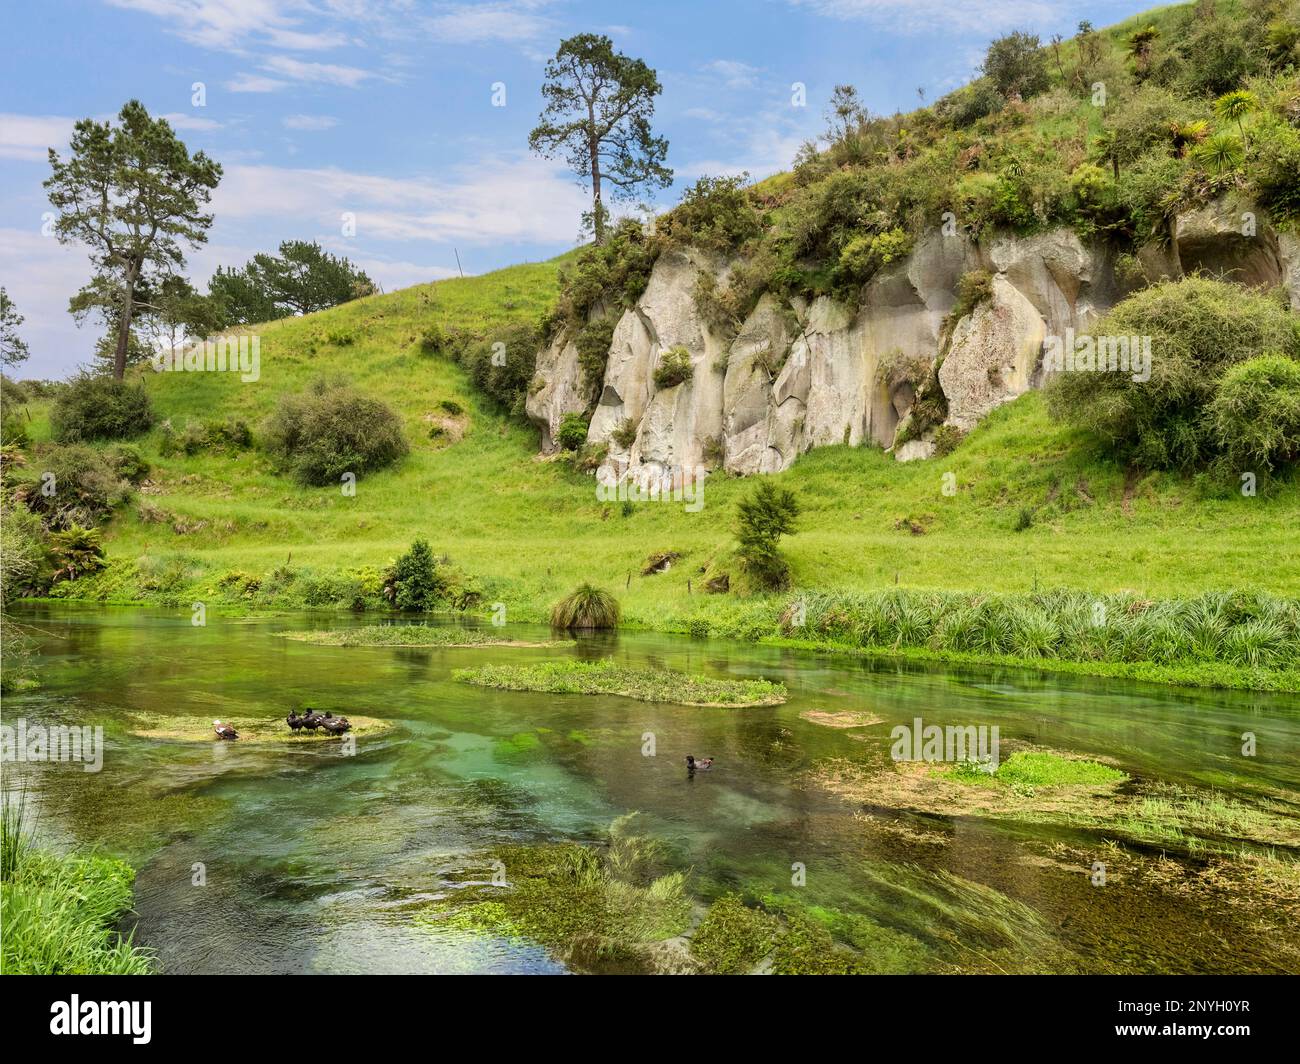 Scene along the Waihou River in the Blue Spring, Te Puna, area of Waikato Region, New Zealand. There is a group of Paradise Shelducks in the river. Stock Photo